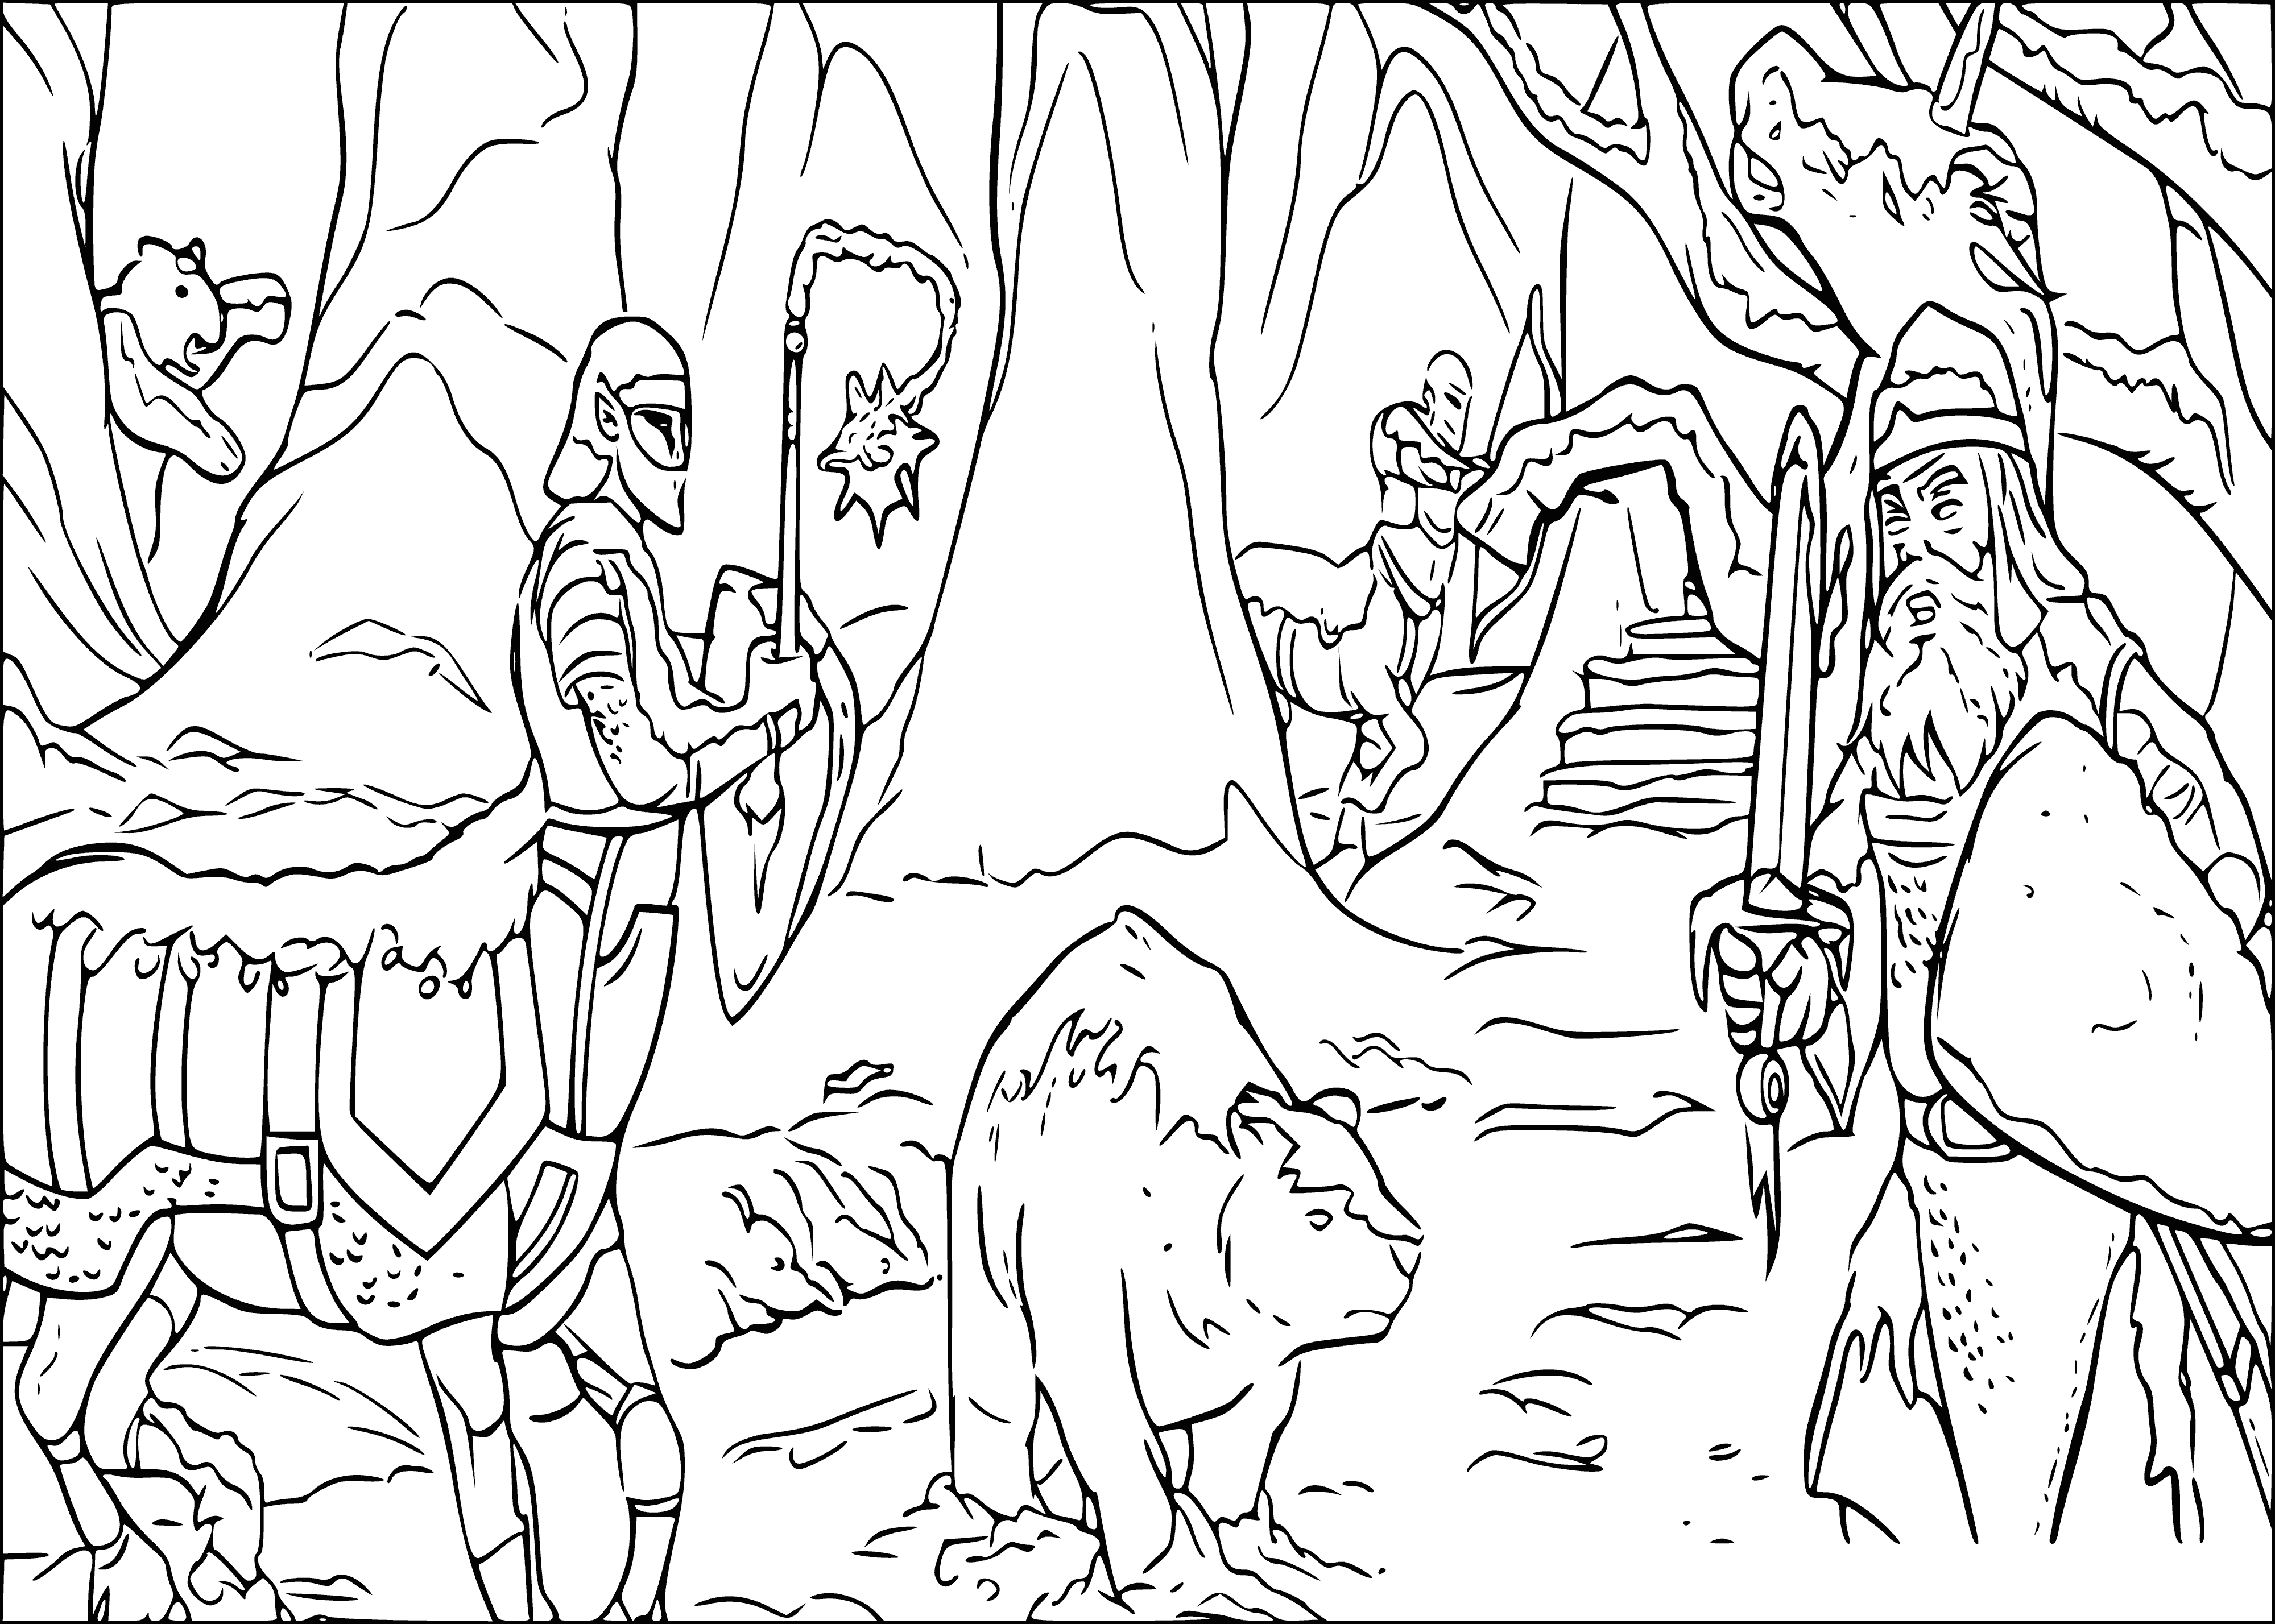 coloring page: 3 large ice sculptures - lion, witch & wardrobe - blue-white color with textured ice & small pieces scattered.